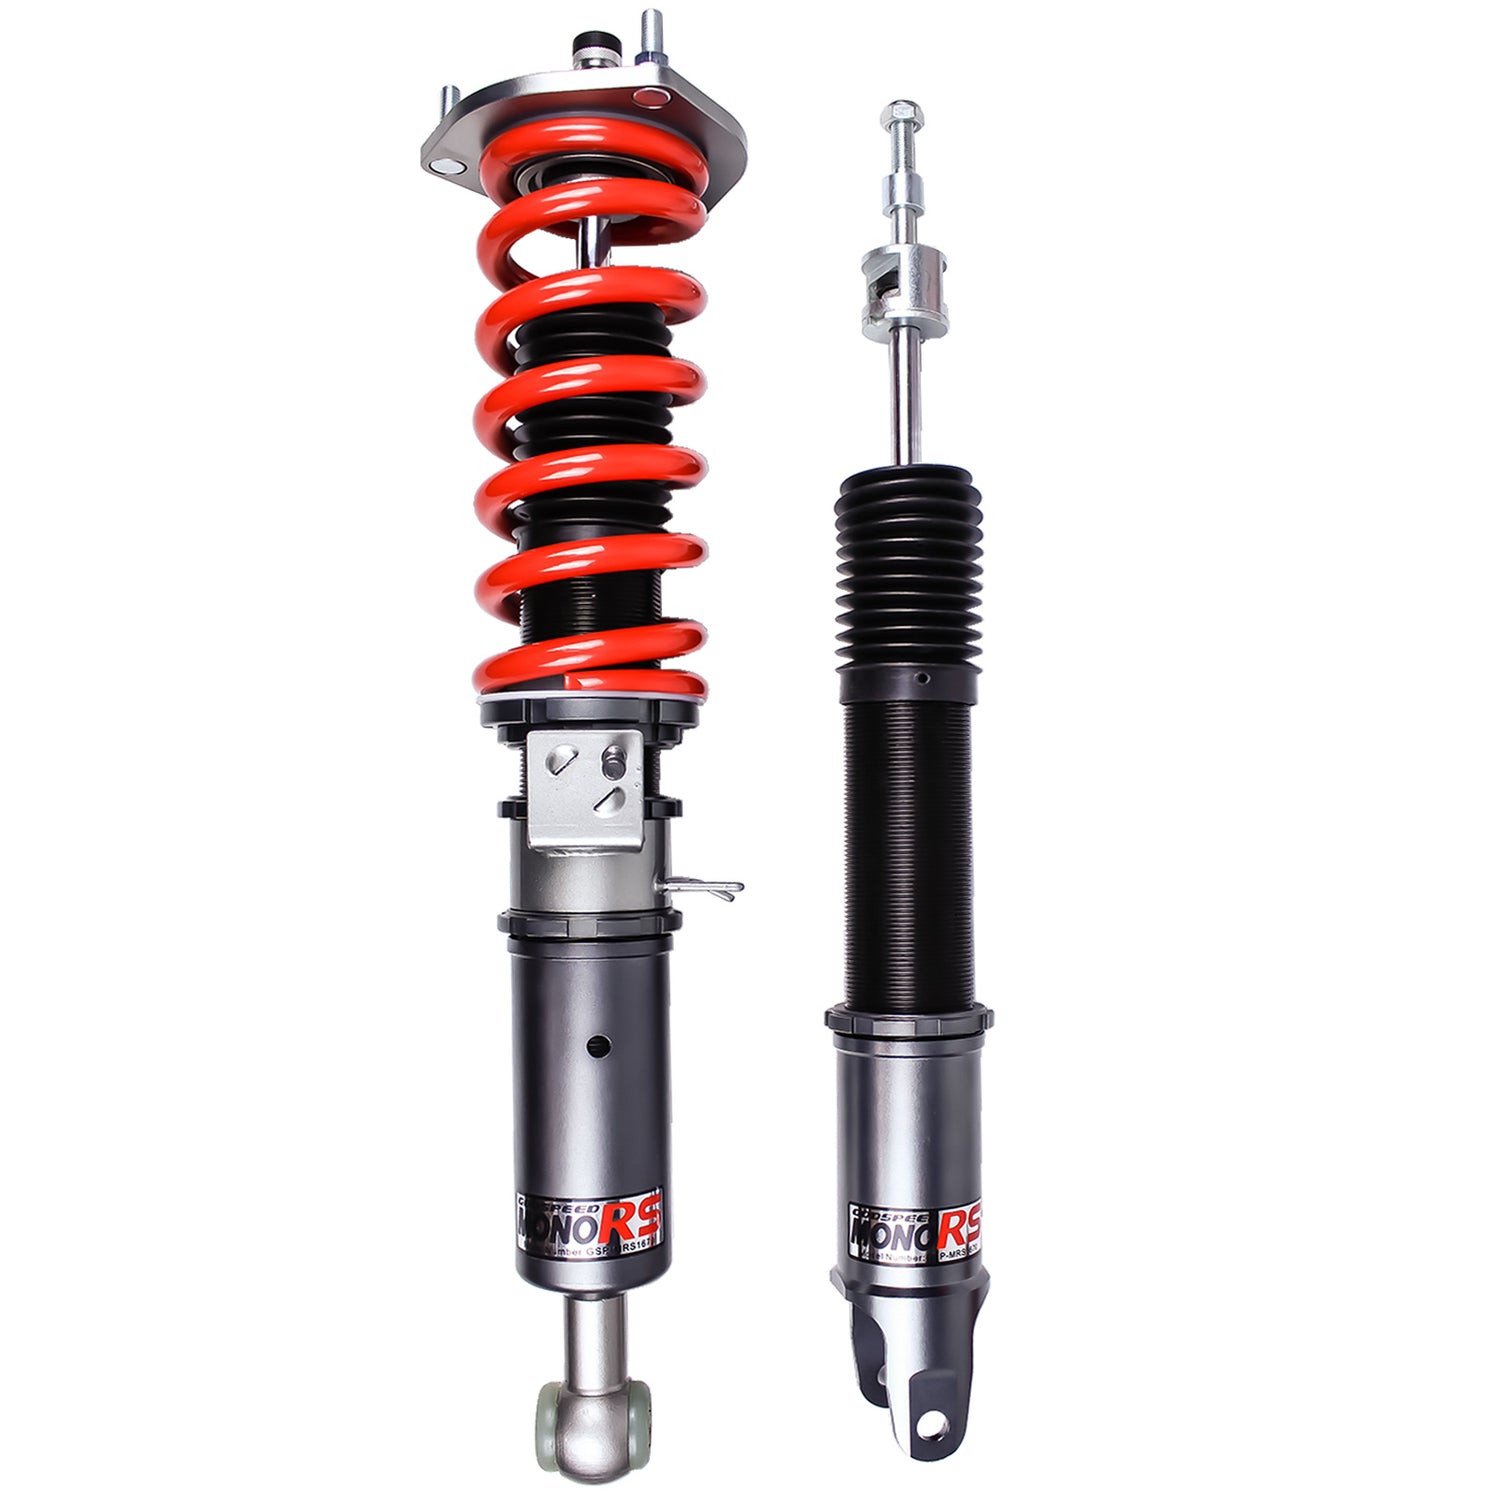 Godspeed MRS1670-D MonoRS Coilover Lowering Kit, 32 Damping Adjustment, Ride Height Adjustable